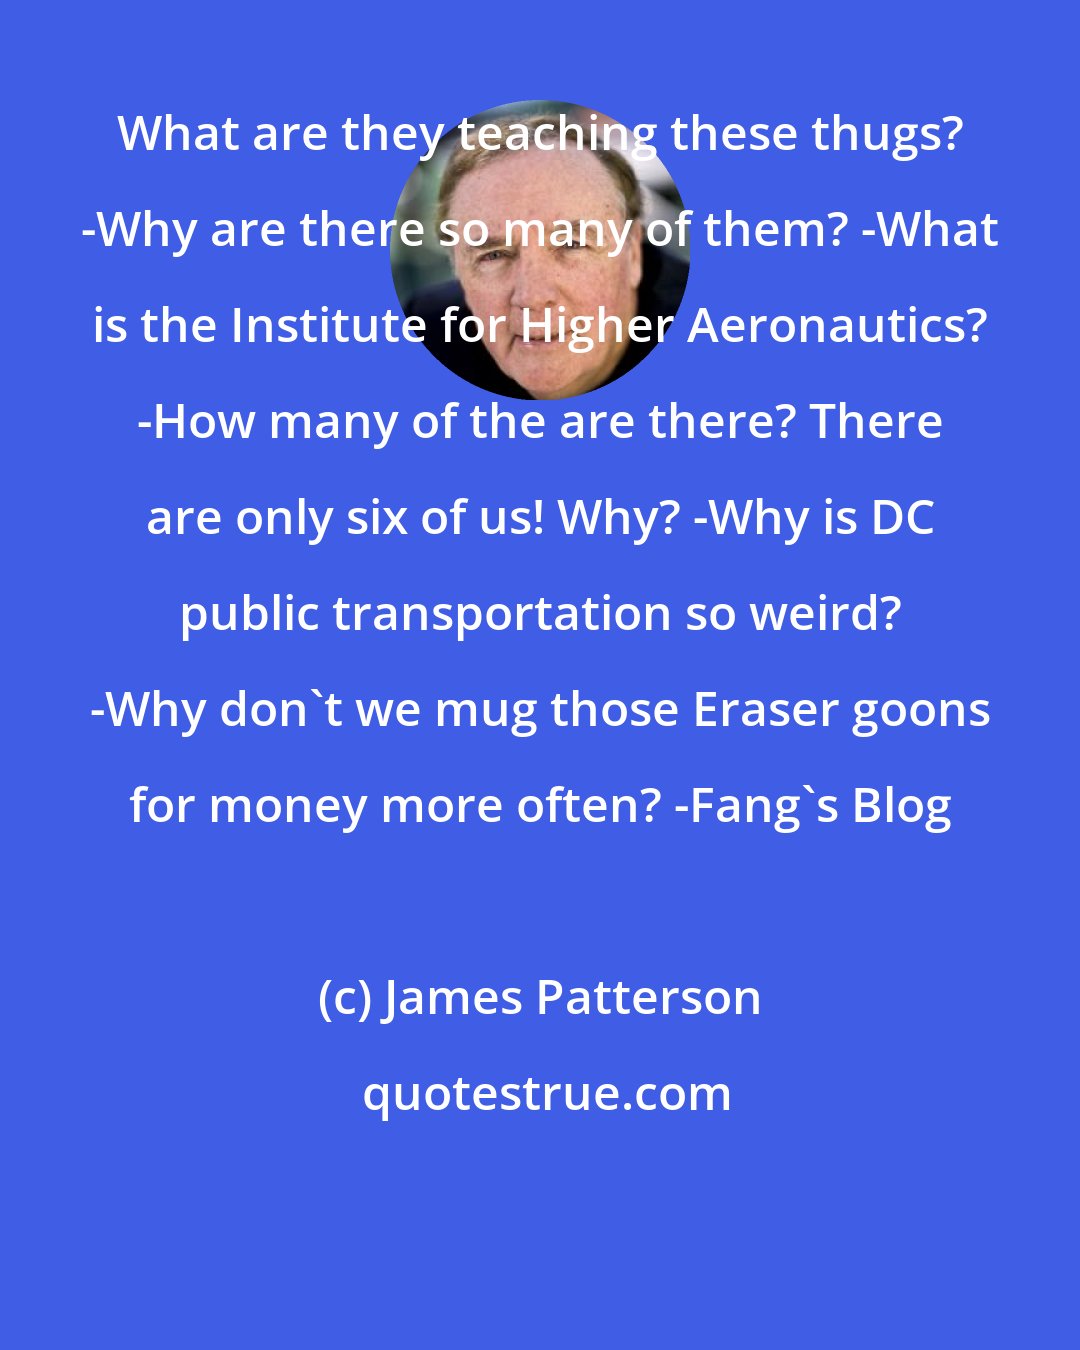 James Patterson: What are they teaching these thugs? -Why are there so many of them? -What is the Institute for Higher Aeronautics? -How many of the are there? There are only six of us! Why? -Why is DC public transportation so weird? -Why don't we mug those Eraser goons for money more often? -Fang's Blog